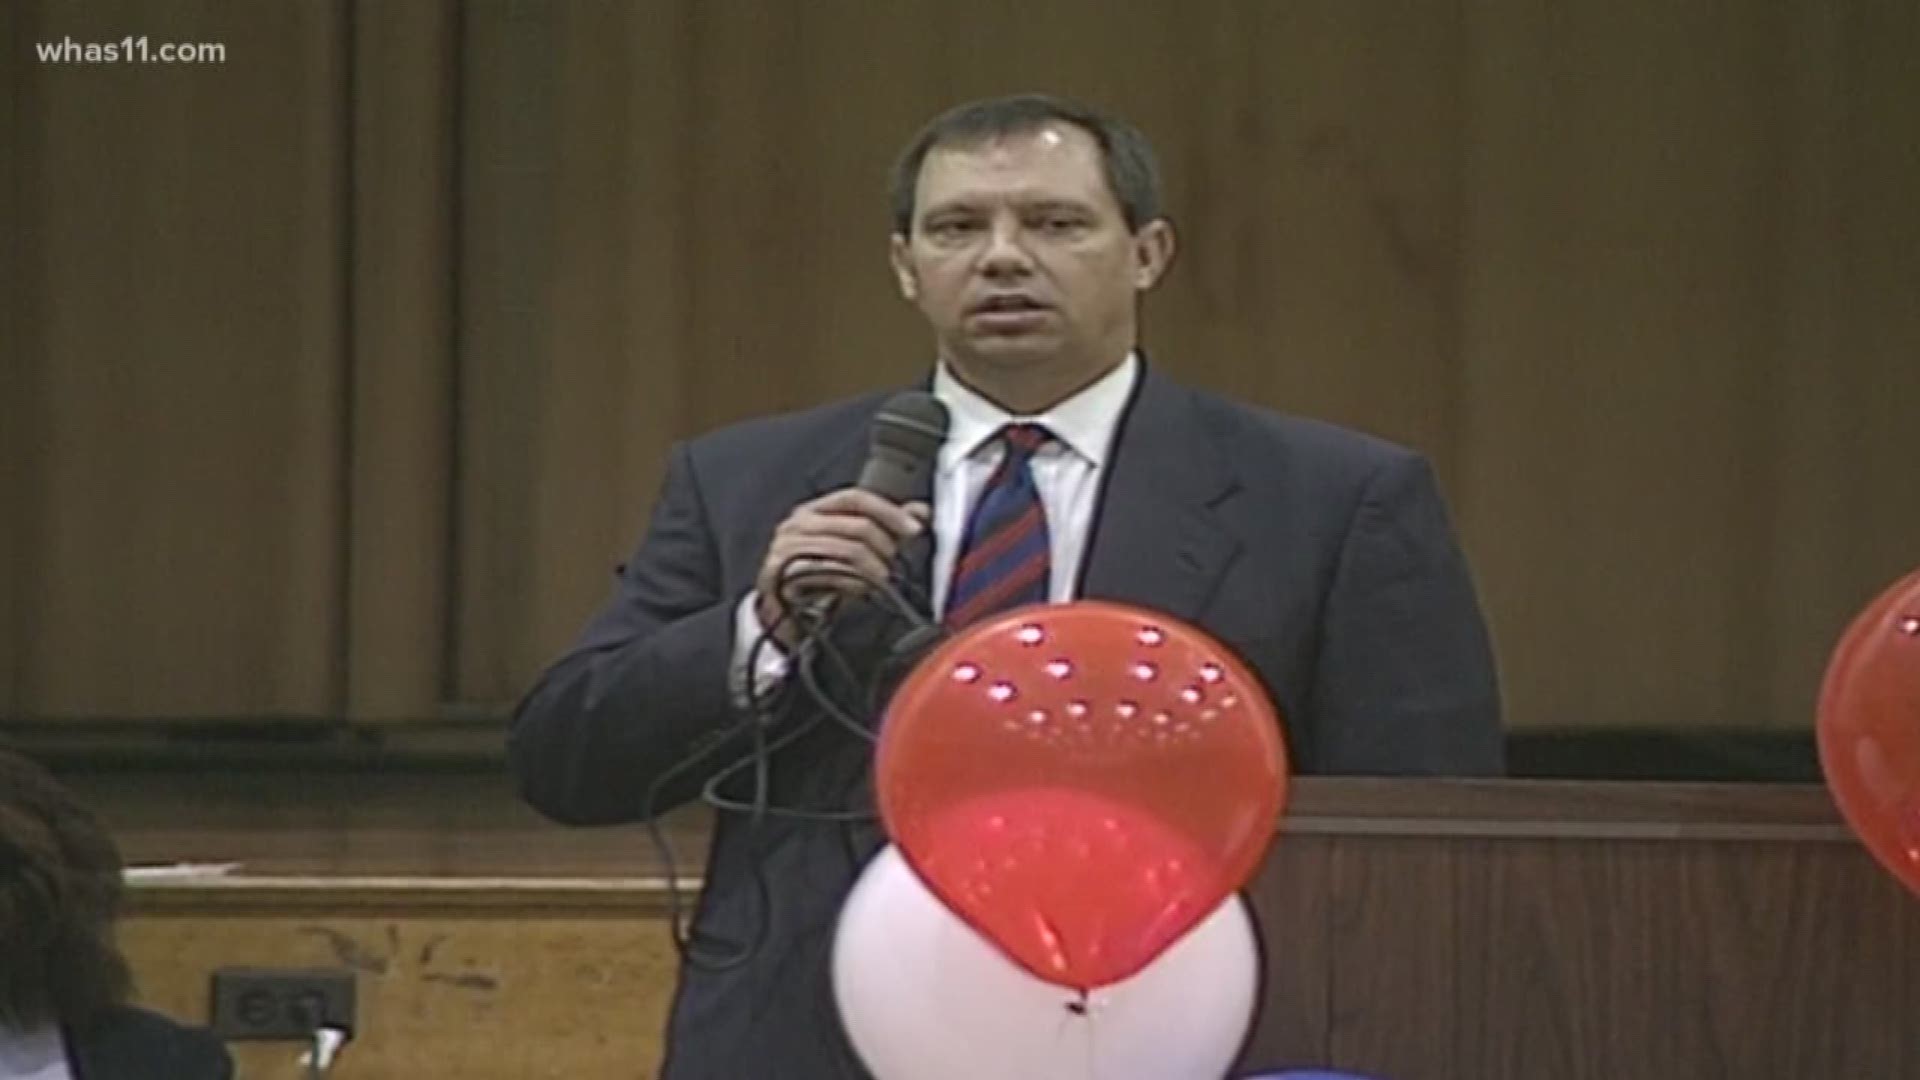 WHAS11 News remembers former general manager Bob Klingle.